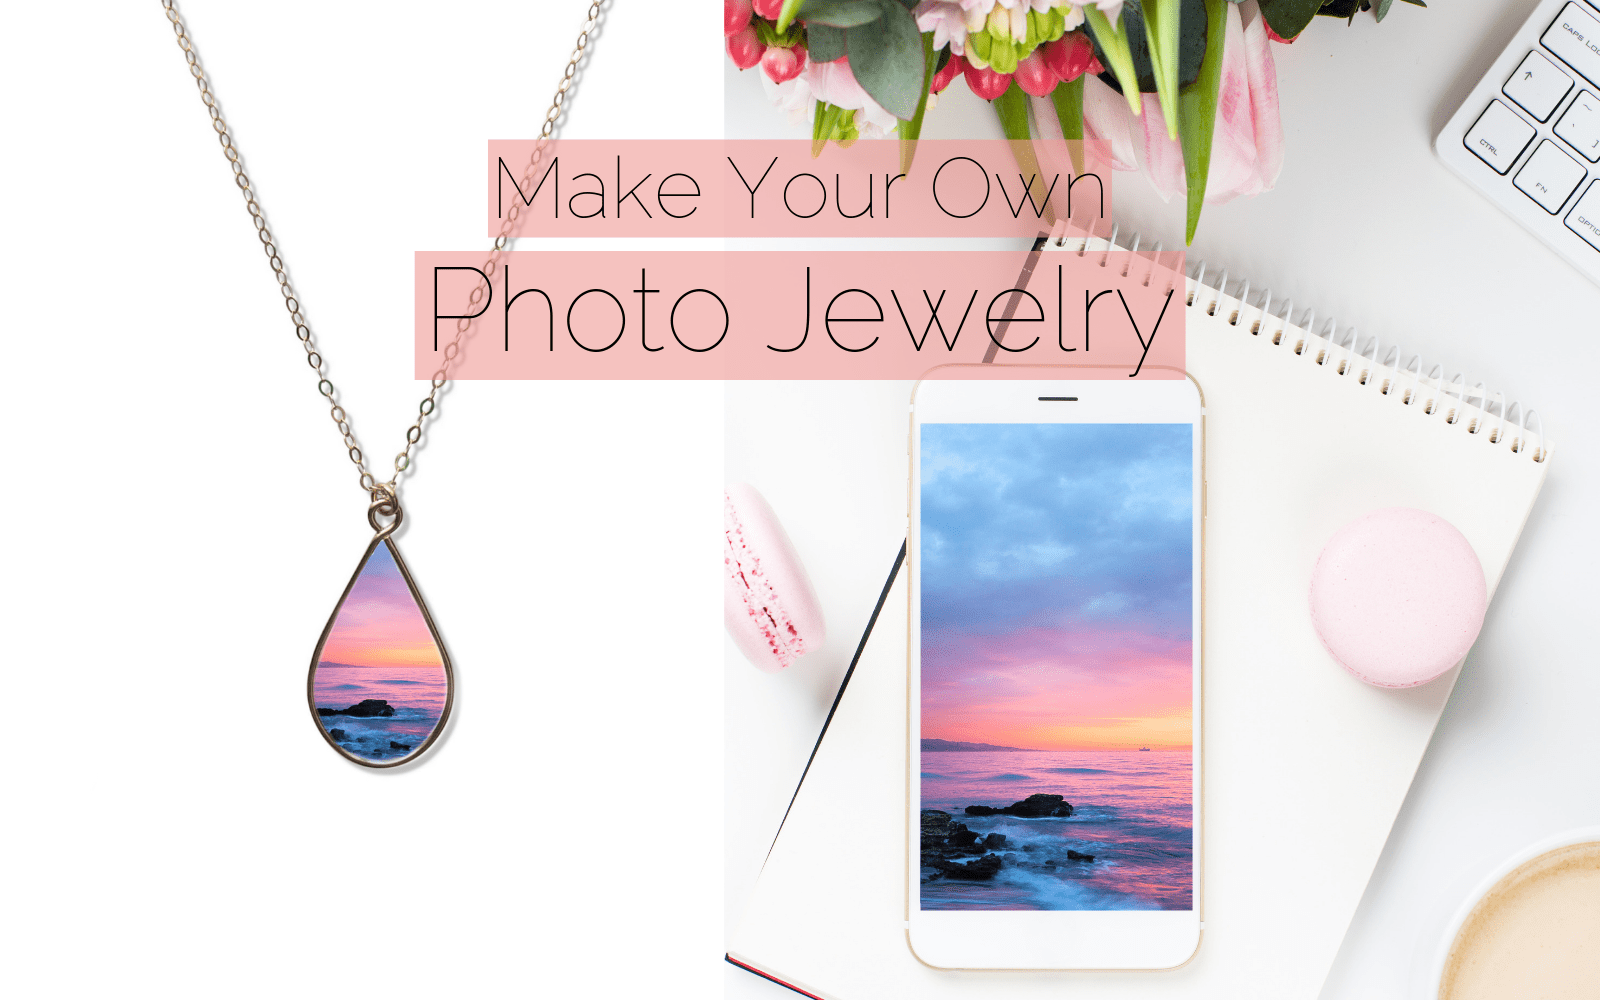 How to Choose The Best Image for Your Custom Photo Jewelry